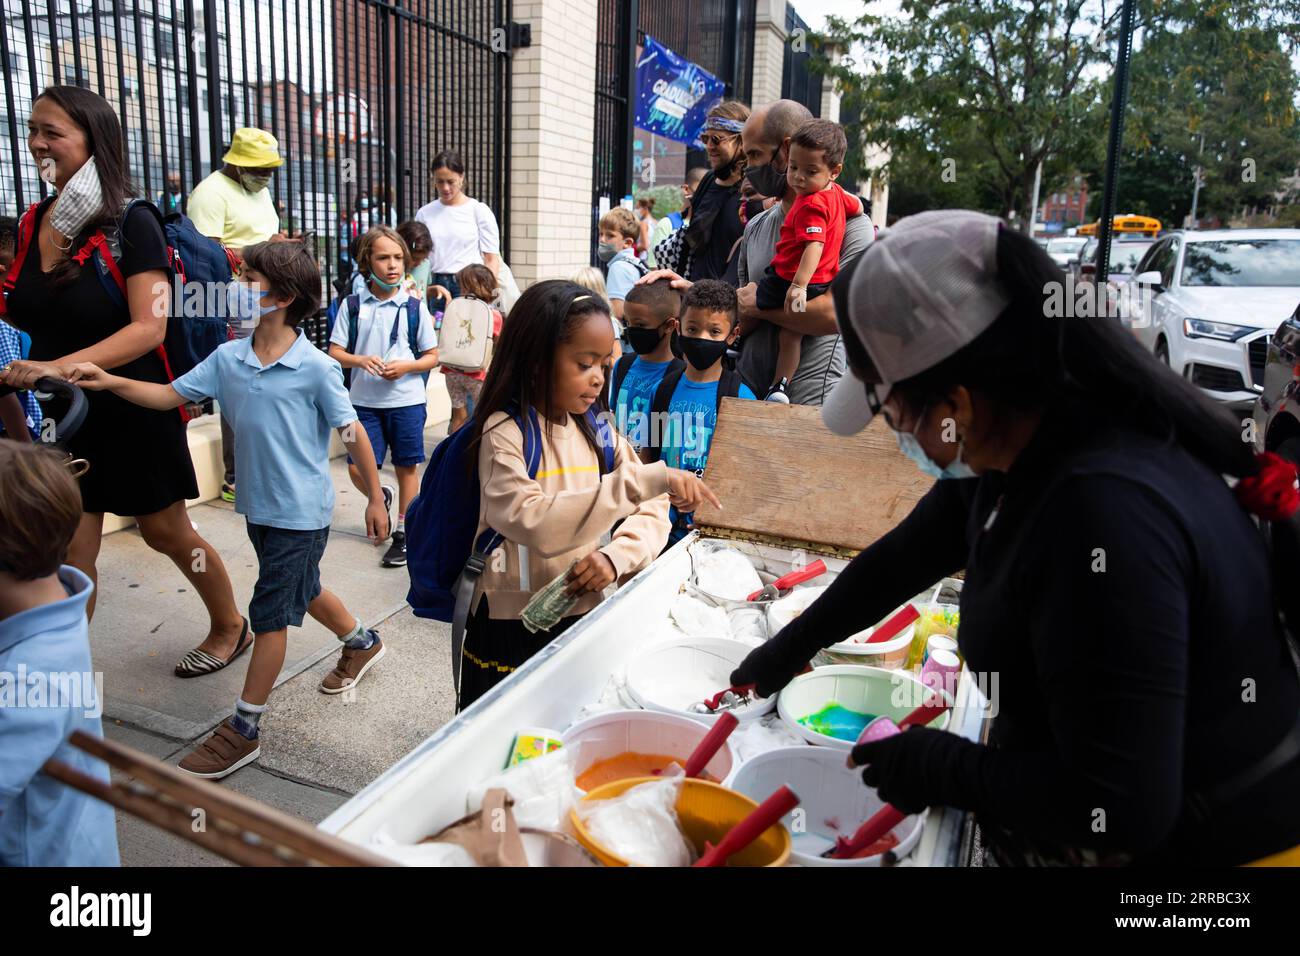 210914 -- NEW YORK, Sept. 14, 2021 -- A student buys ice cream after the first day of school at PS 133 in the Brooklyn borough of New York, the United States, on Sept. 13, 2021. The public schools in New York City started a new school year with full in-person teaching and learning on Monday as many parents and teachers are still calling for an on-line option. The public school system in New York City, the biggest one in the United States with about 1.1 million students, saw the return of most of its students with joy and anxiety. Photo by /Xinhua U.S.-NEW YORK-SCHOOL-REOPENING MichaelxNagle PU Stock Photo